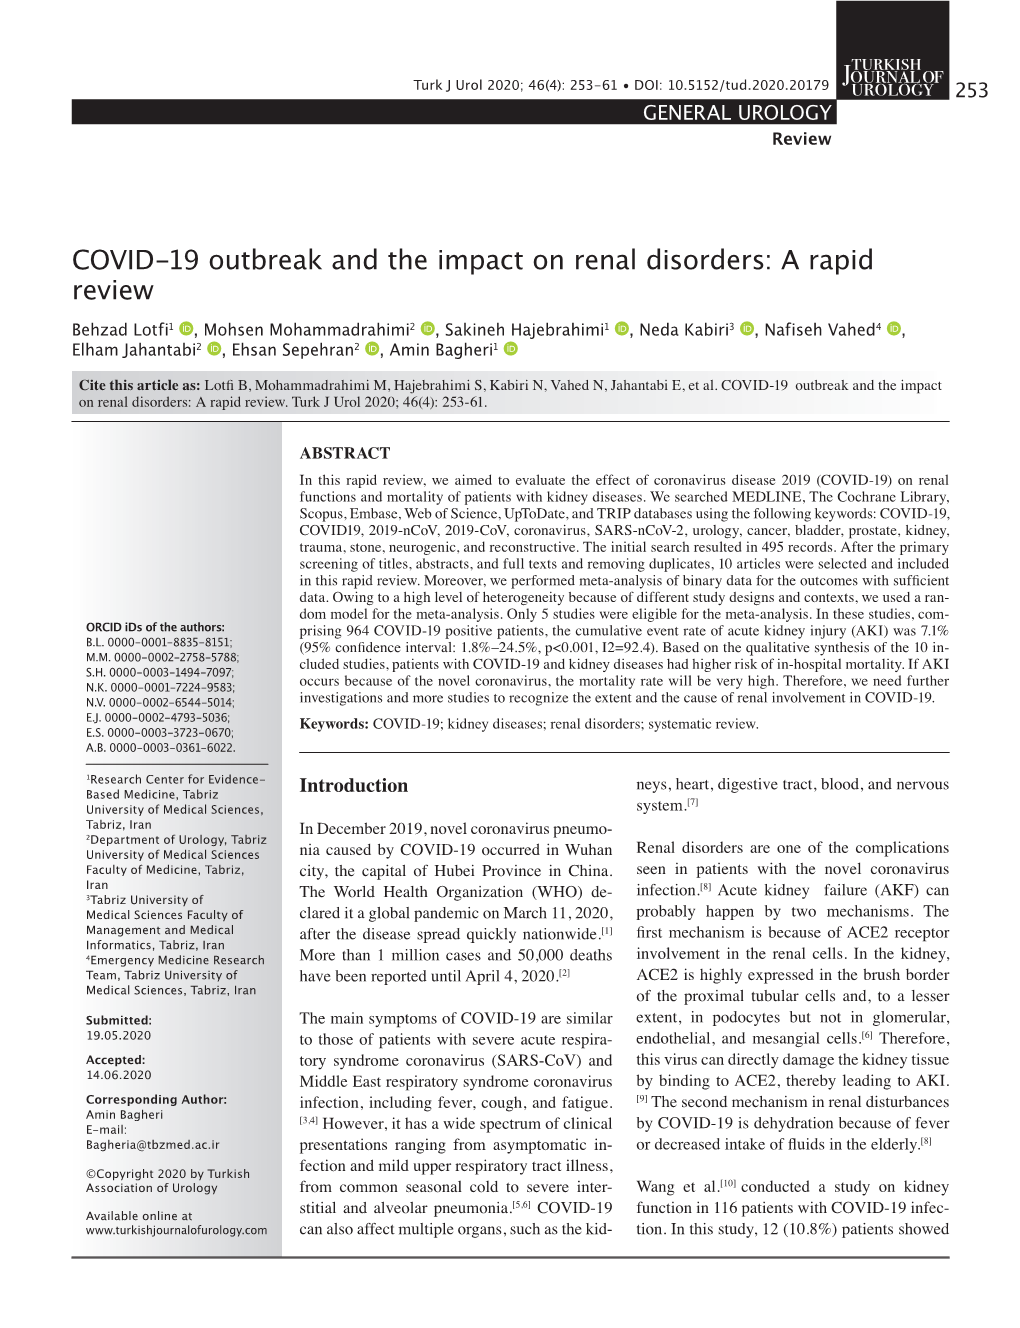 COVID-19 Outbreak and the Impact on Renal Disorders: a Rapid Review